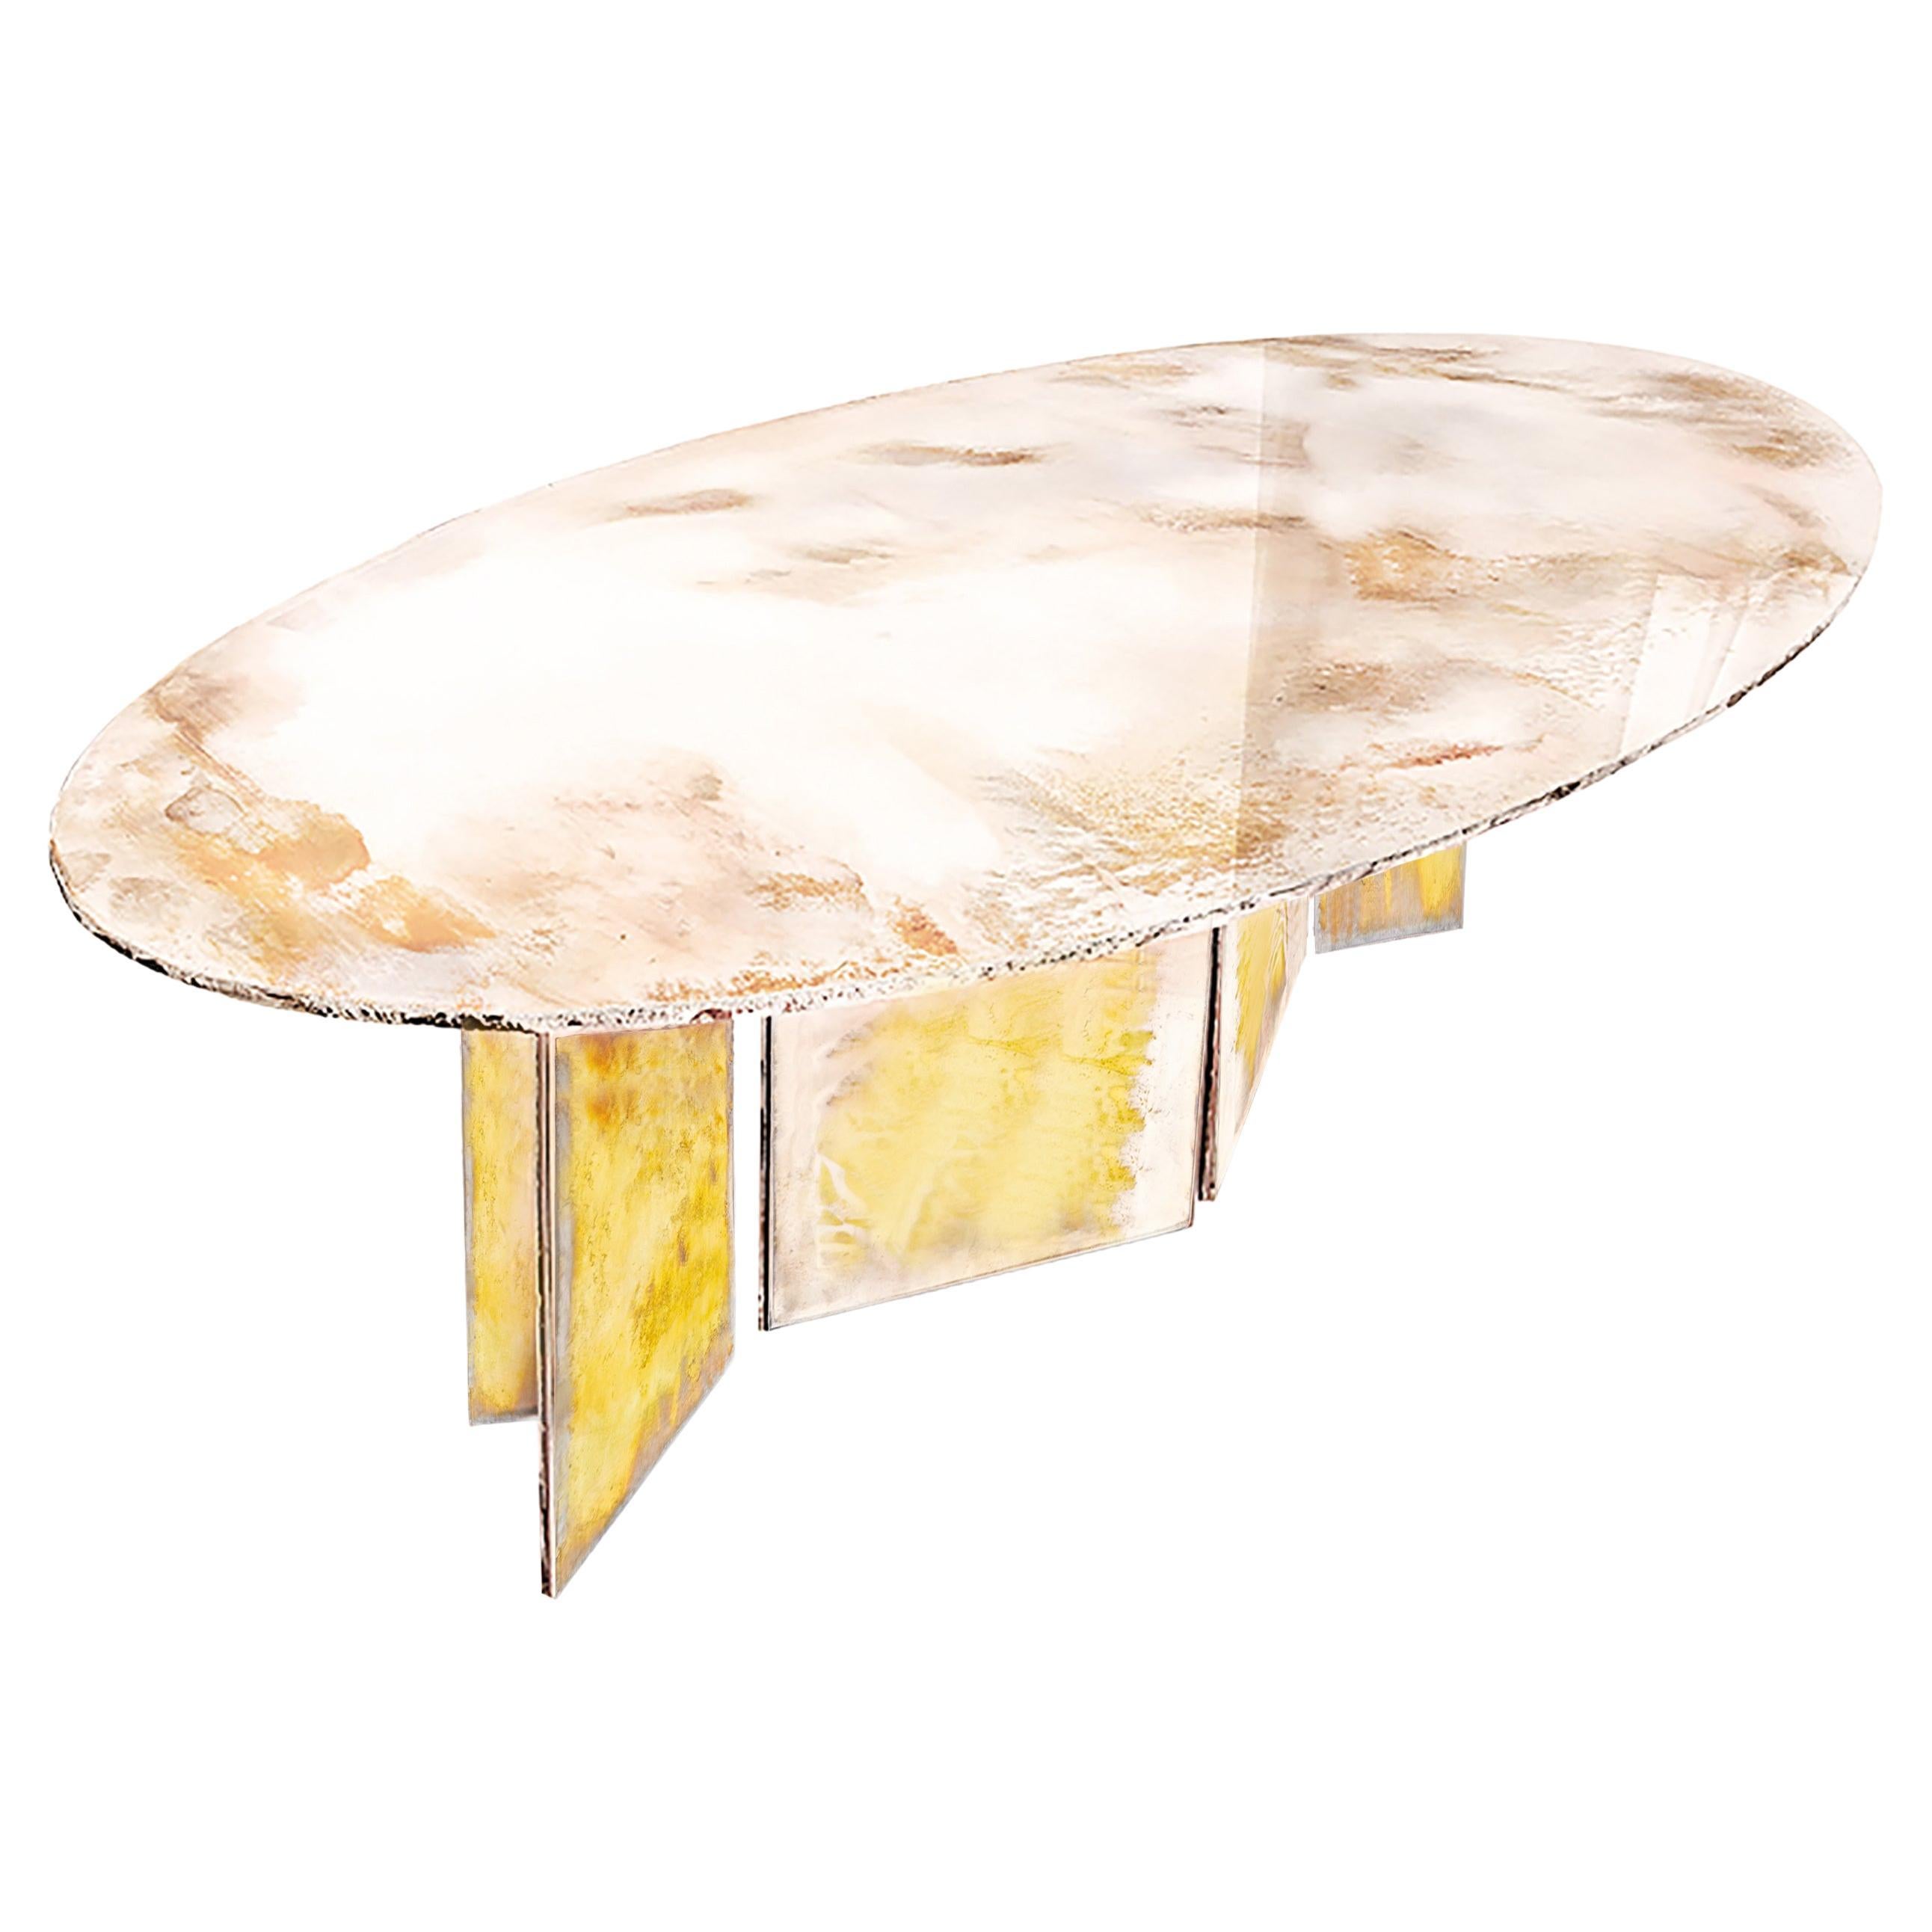 "Flight" Contemporary Dining Table 285 Double Silvered Glass Top, Sun Glass Legs